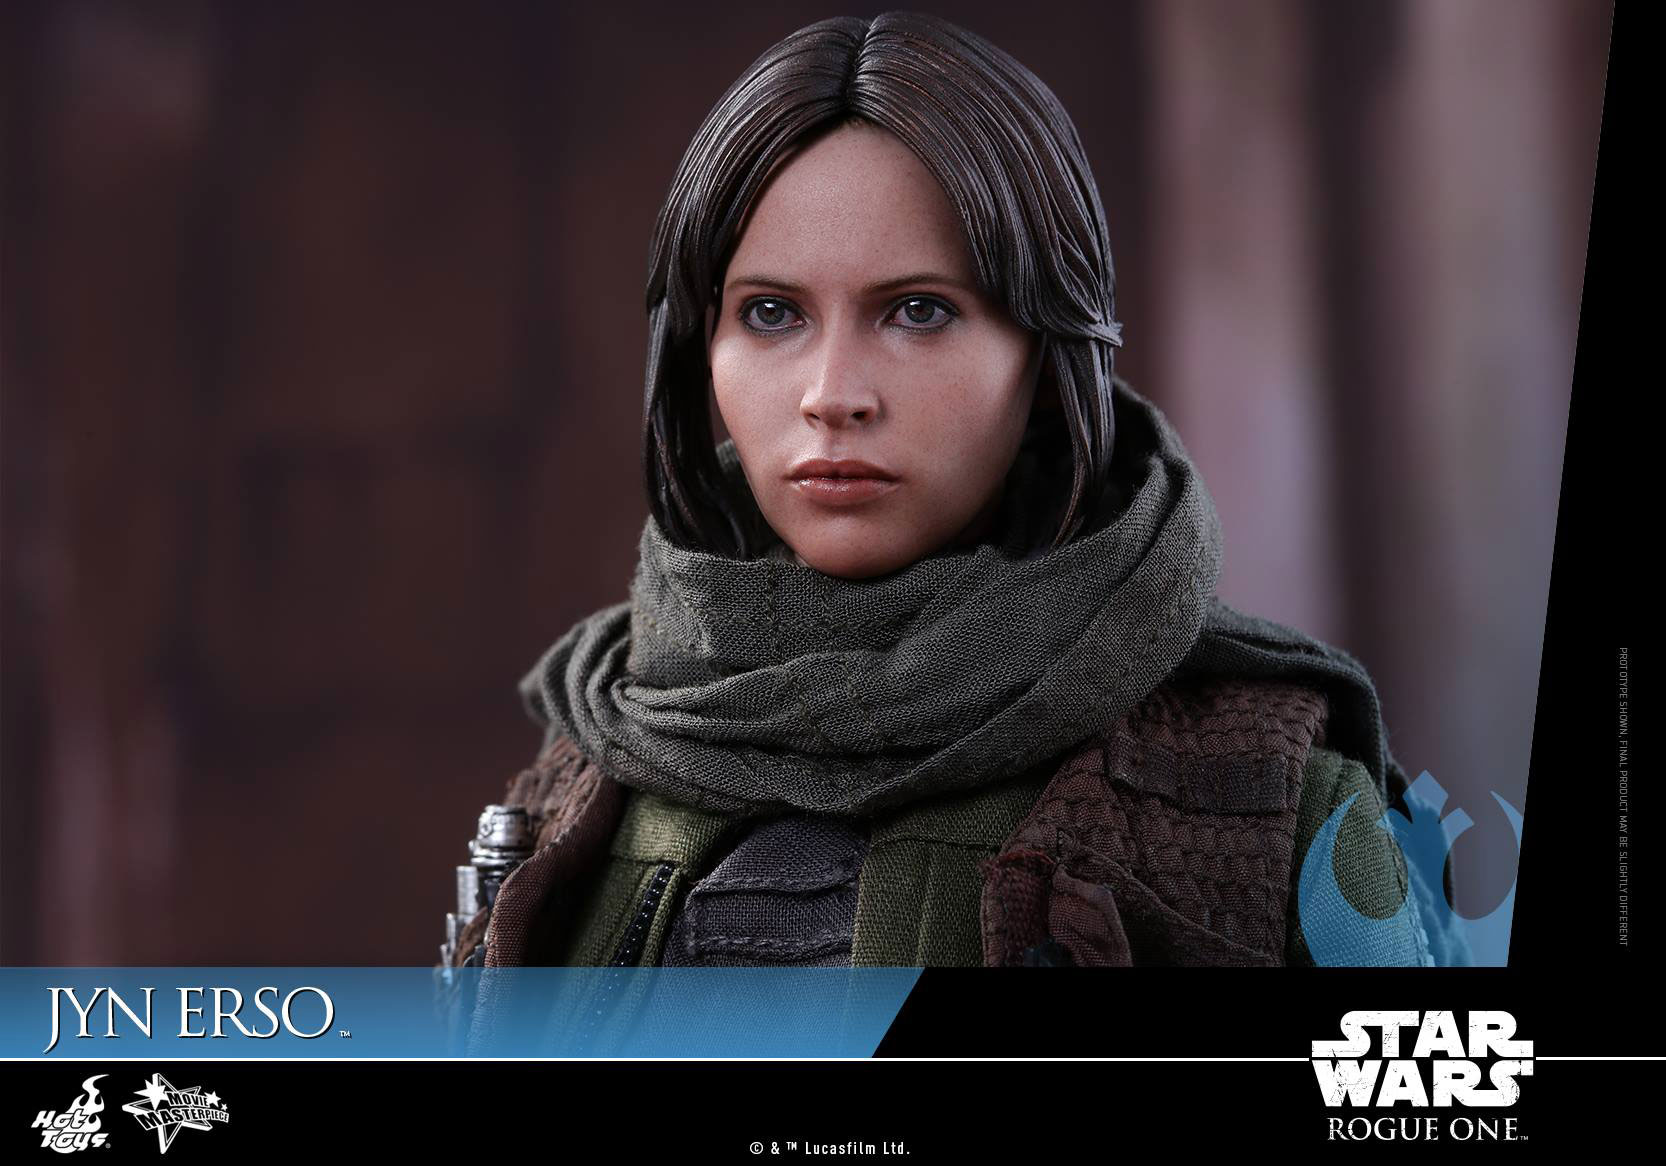 hot-toys-star-wars-rogue-one-jyn-erso-figure-3